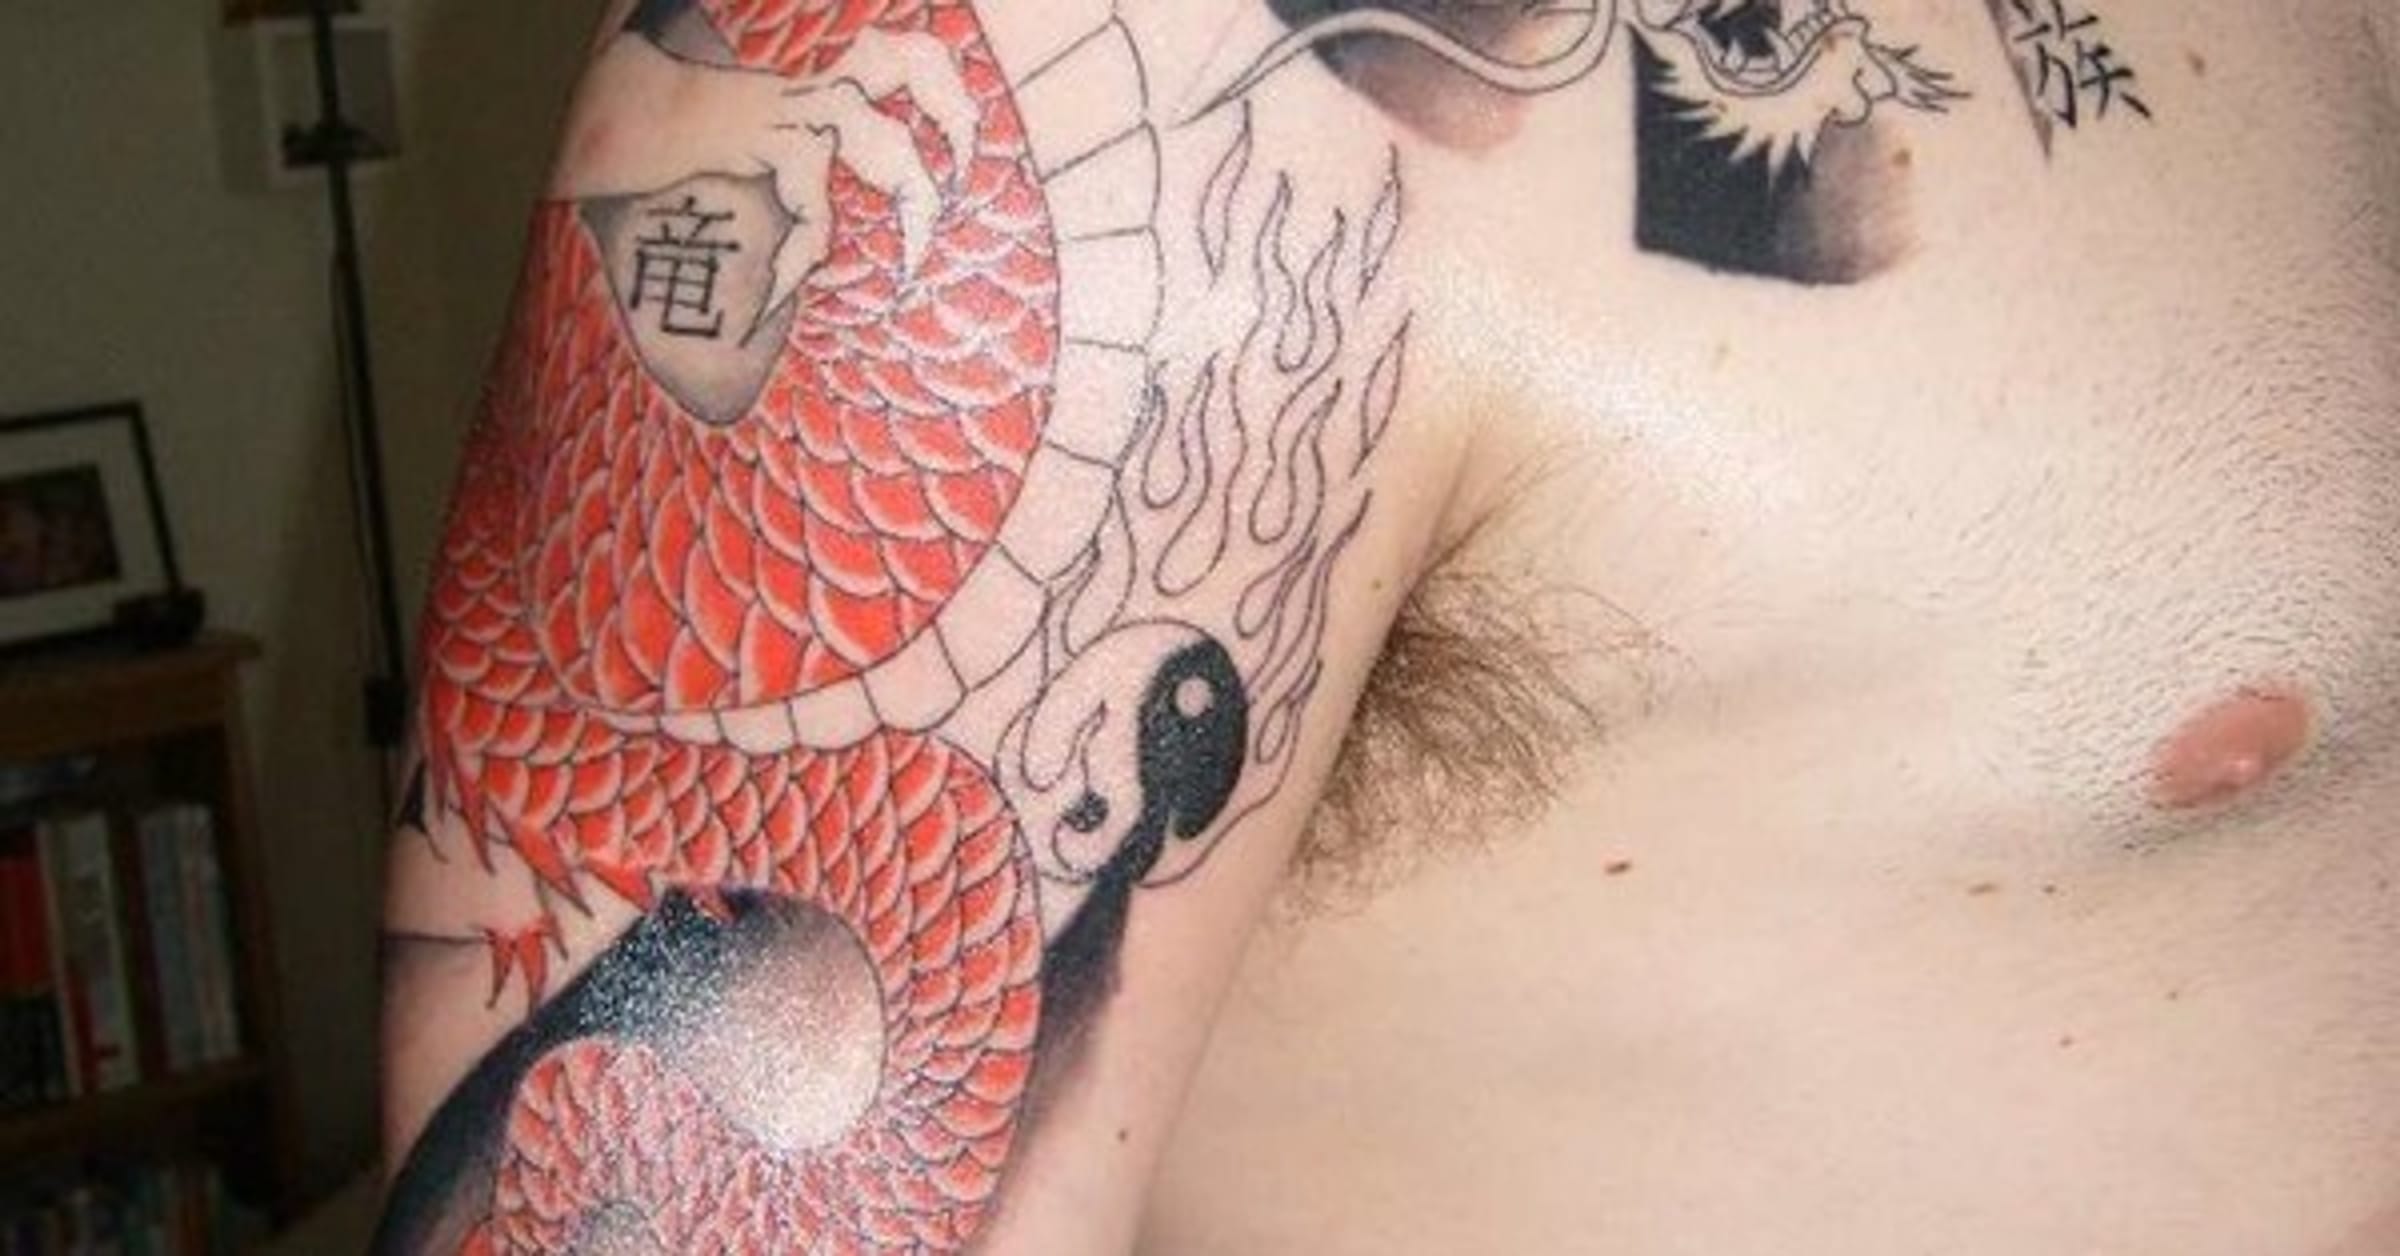 Extend full sleeve arm with chest tattoo, Tattoo contest